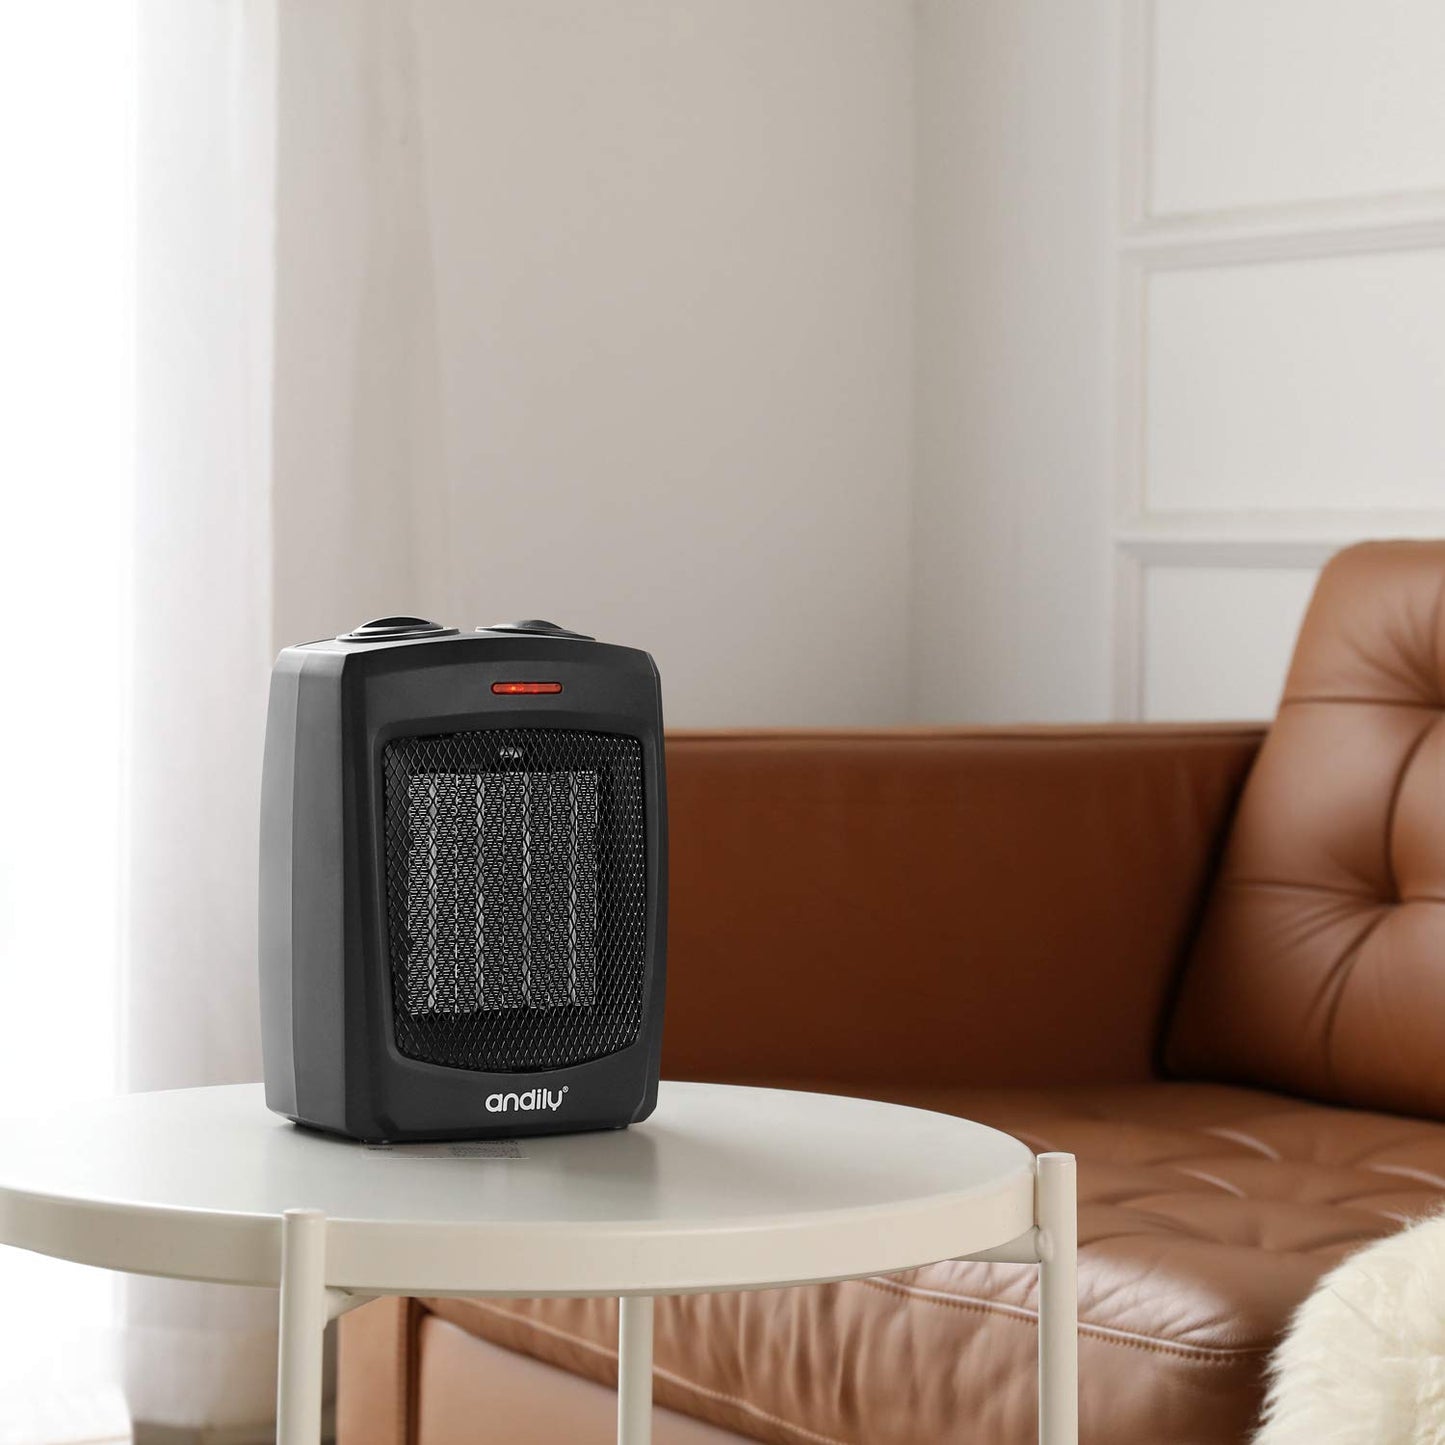 Ceramic Small Heater with Thermostat, Quiet and Compact - Black